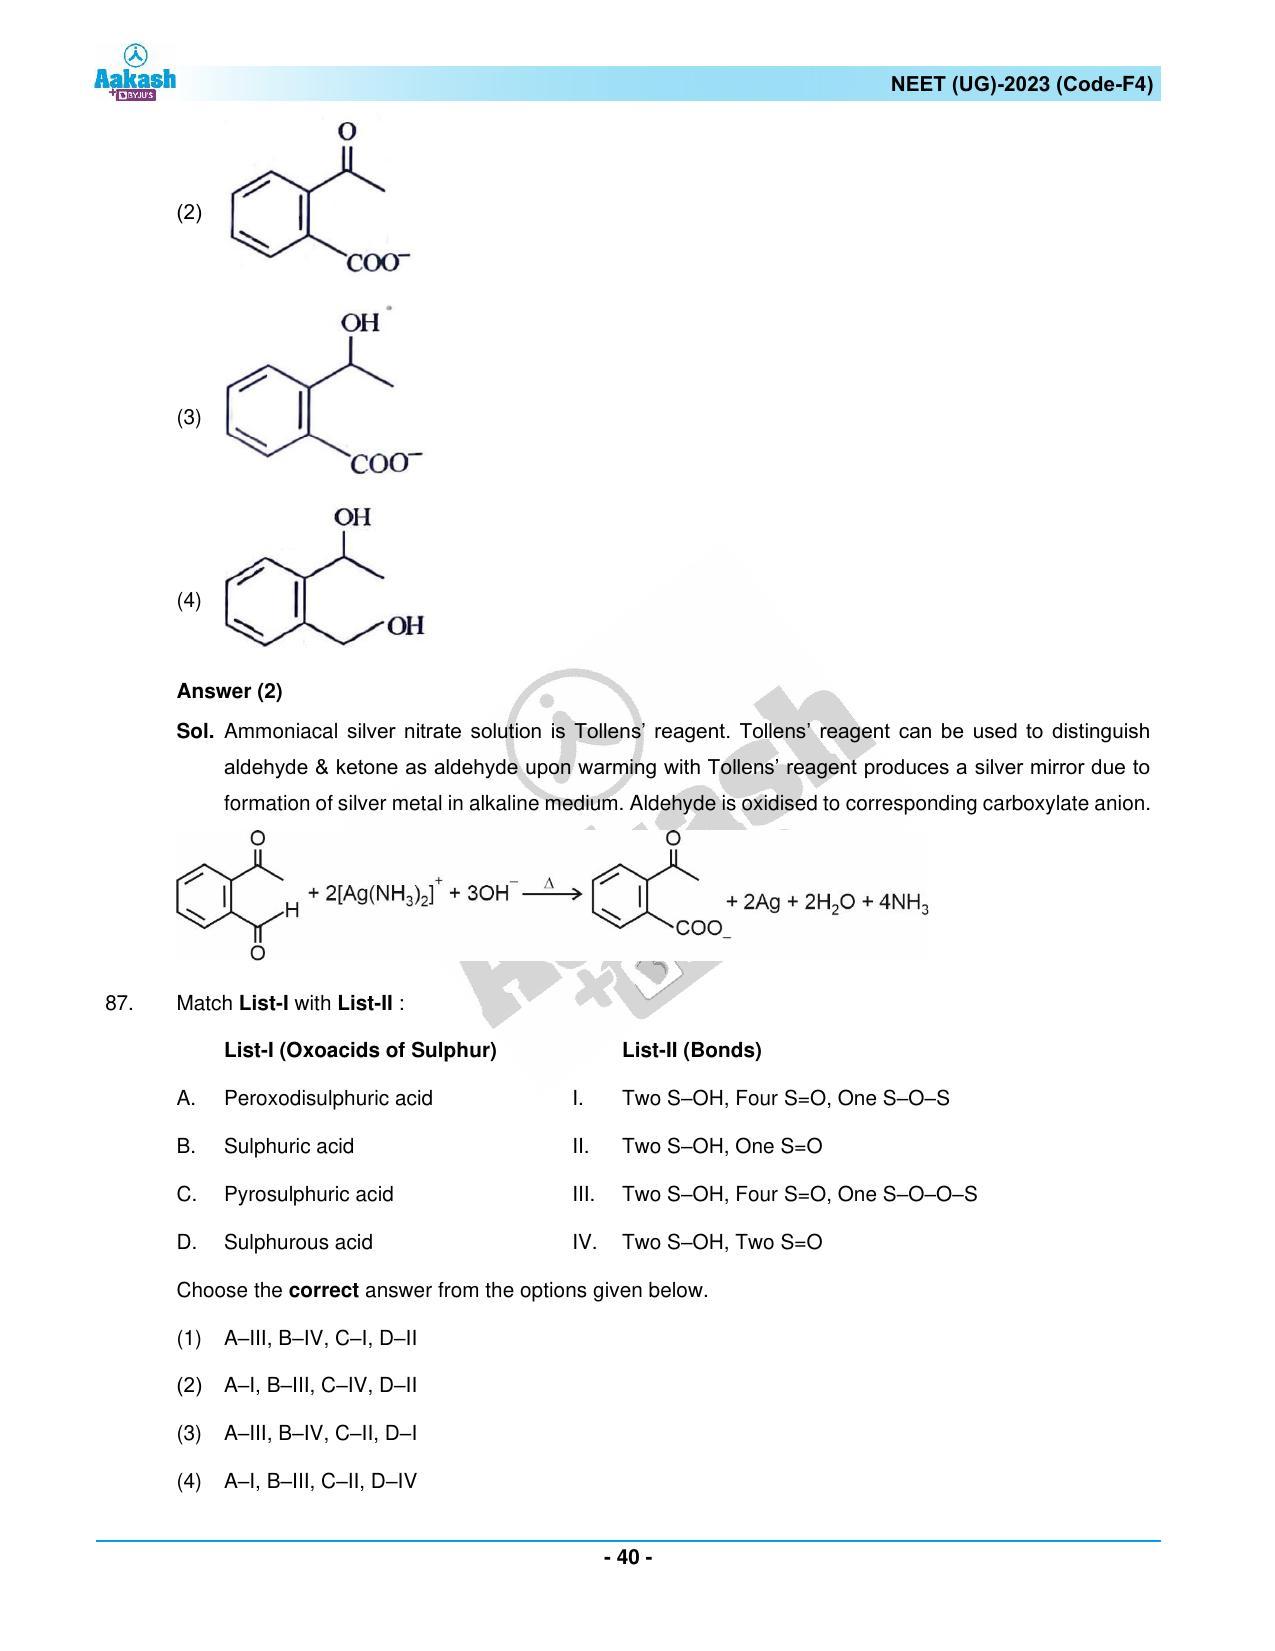 NEET 2023 Question Paper F4 - Page 40